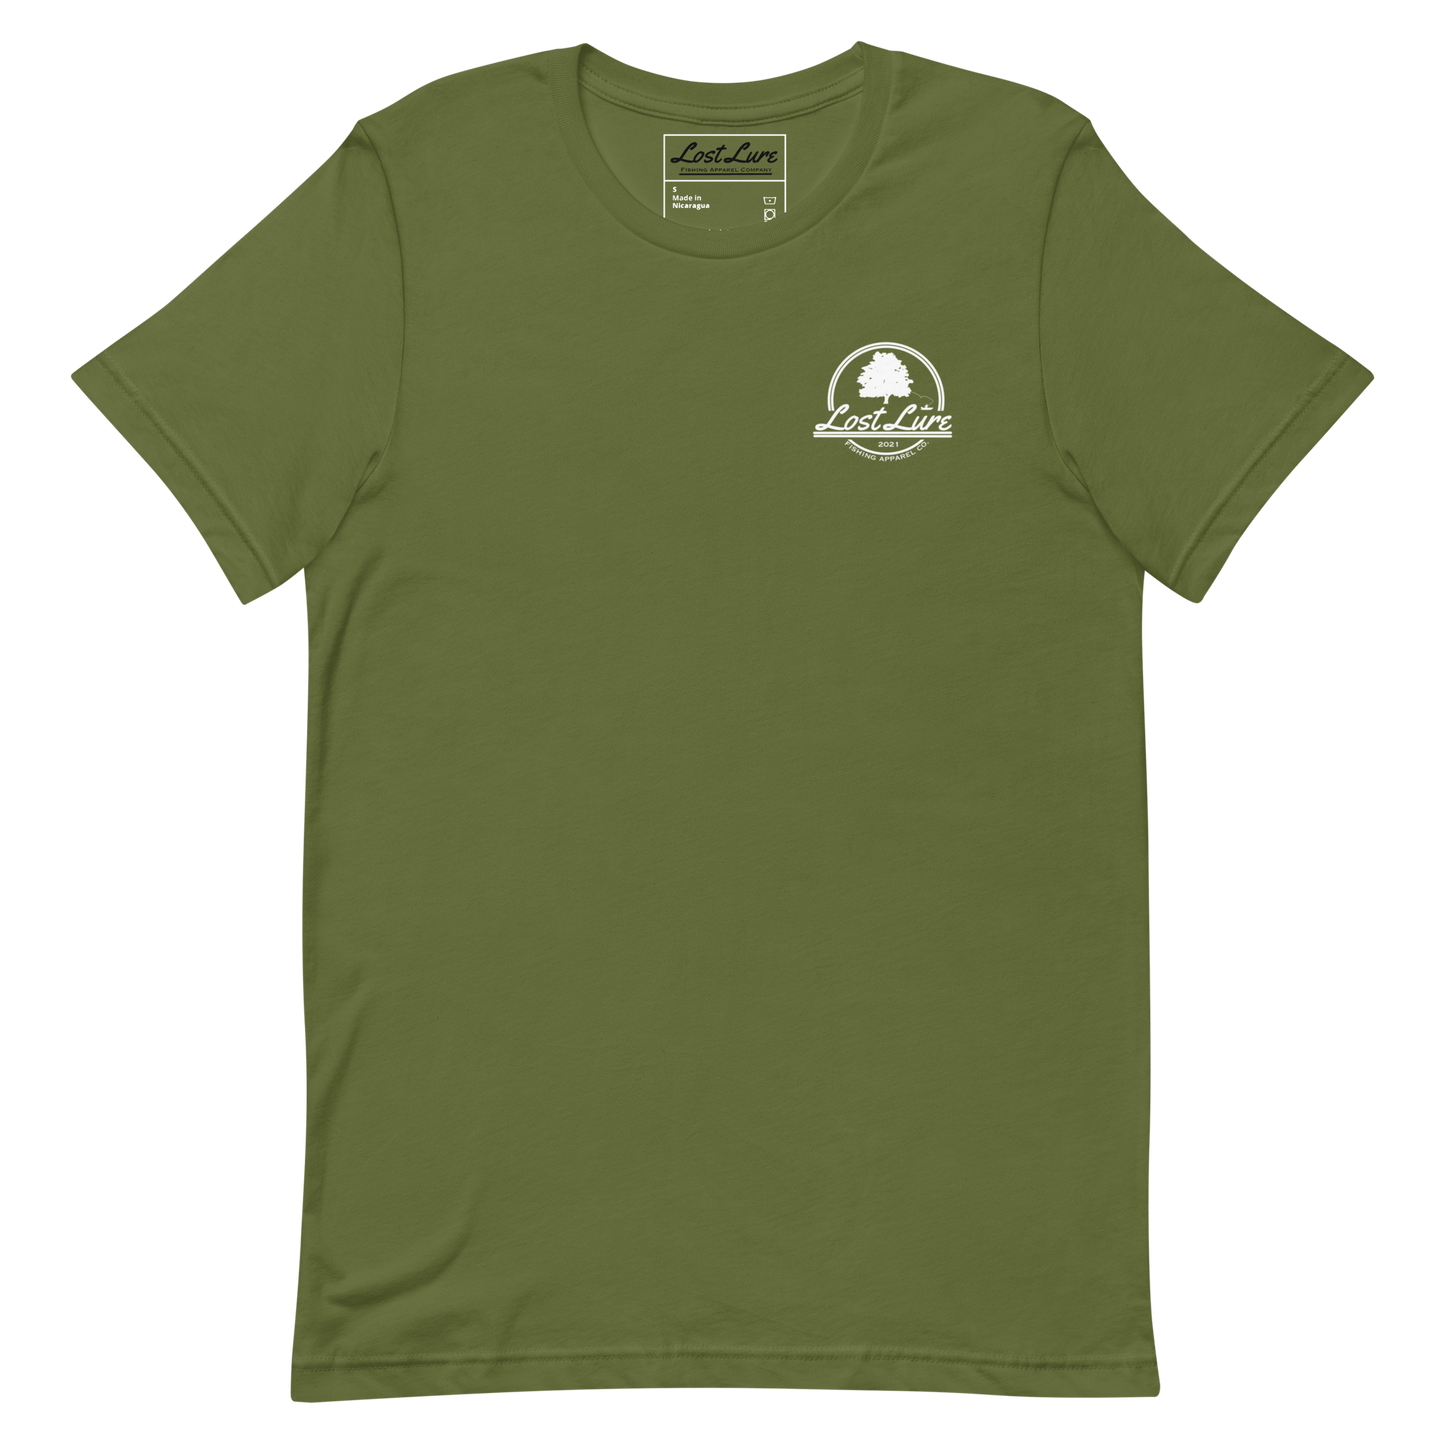 Cutthroat Trout fishing shirt. It’s an American traditional style design with a cutthroat trout and a dagger. The shirt reads Cutthroat trout, est. 2021, lost lure fishing apparel company. The front of the shirt has the lost lure logo. green, front side